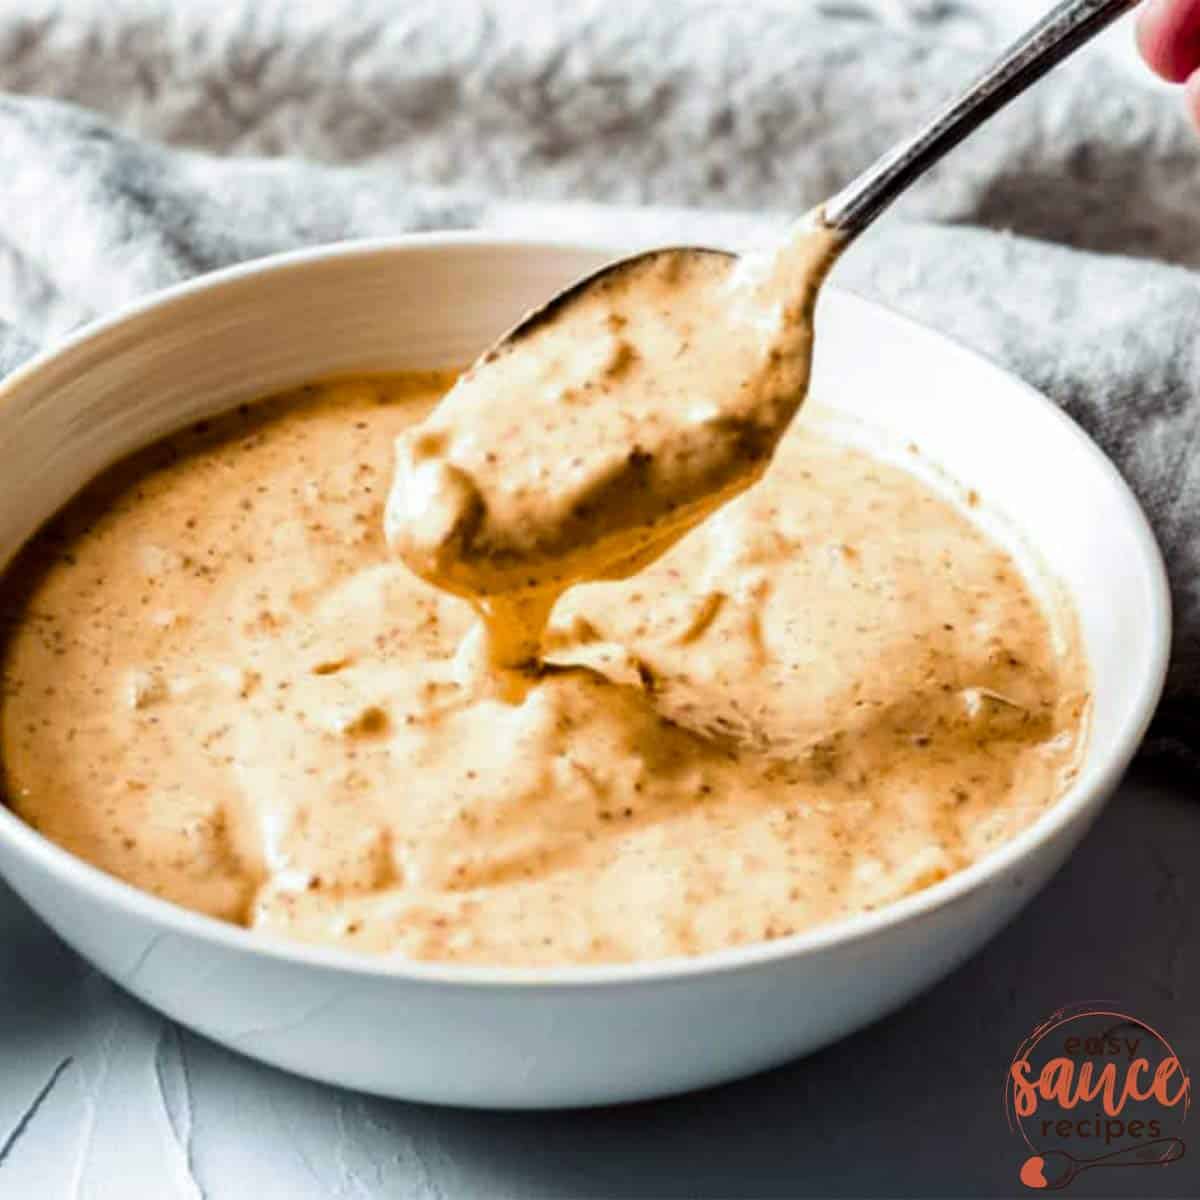 remoulade sauce in a bowl with a spoon